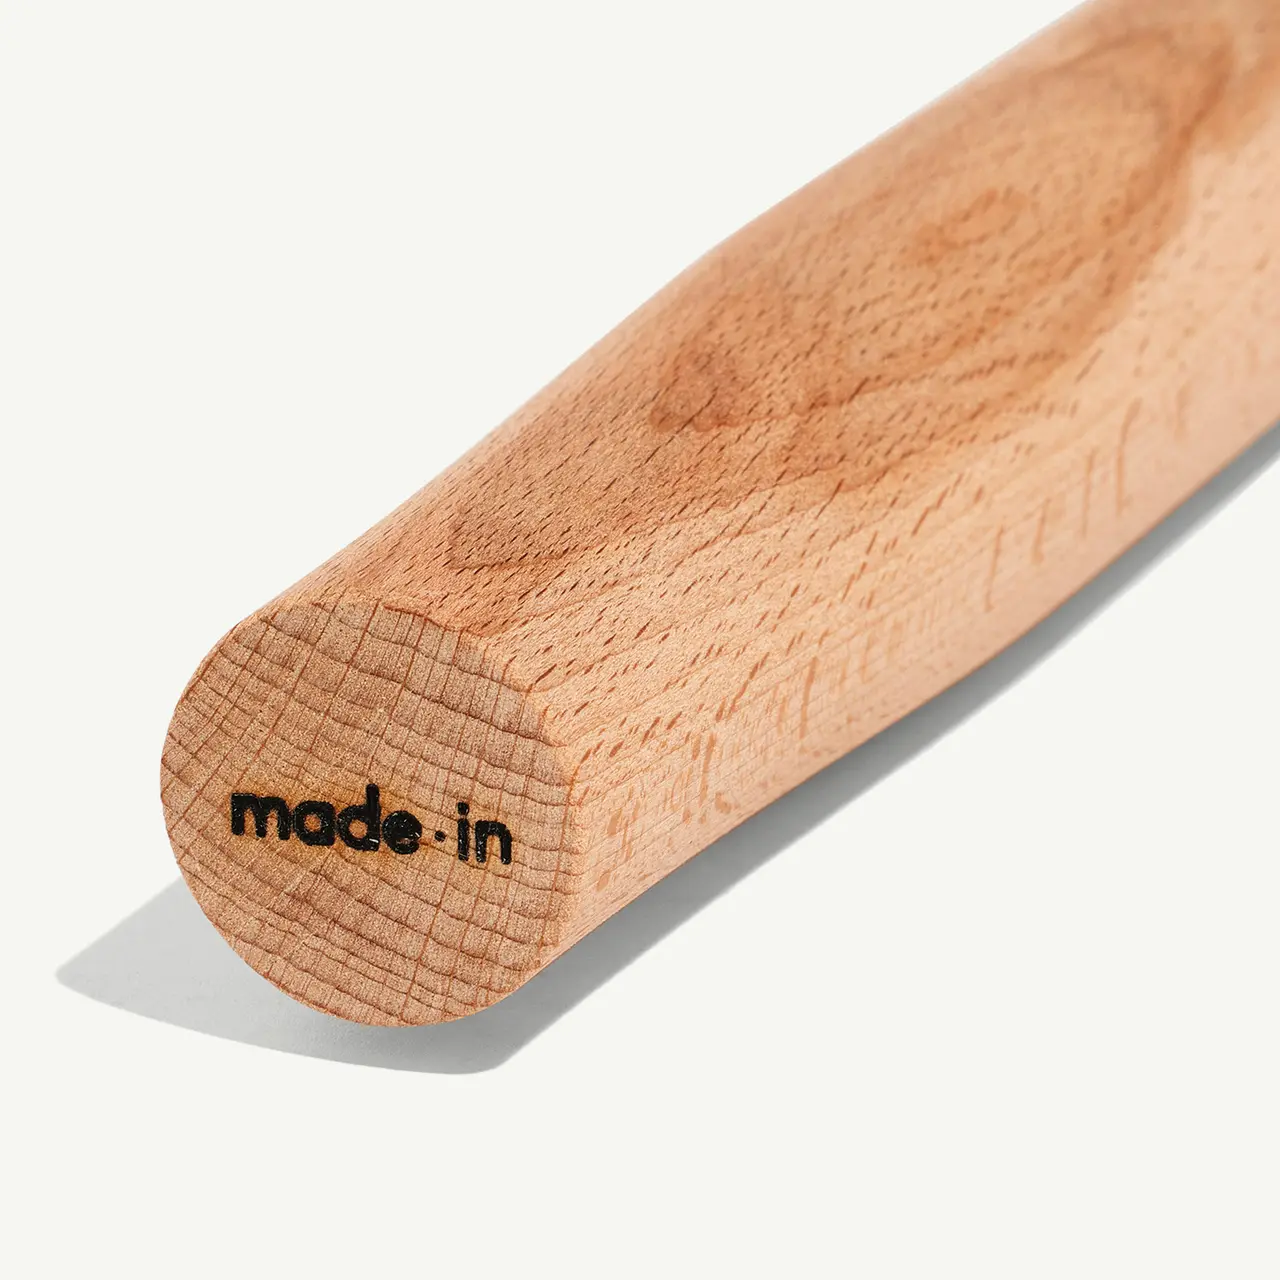 A close-up view of a wooden object with the words "made in" stamped on its end.